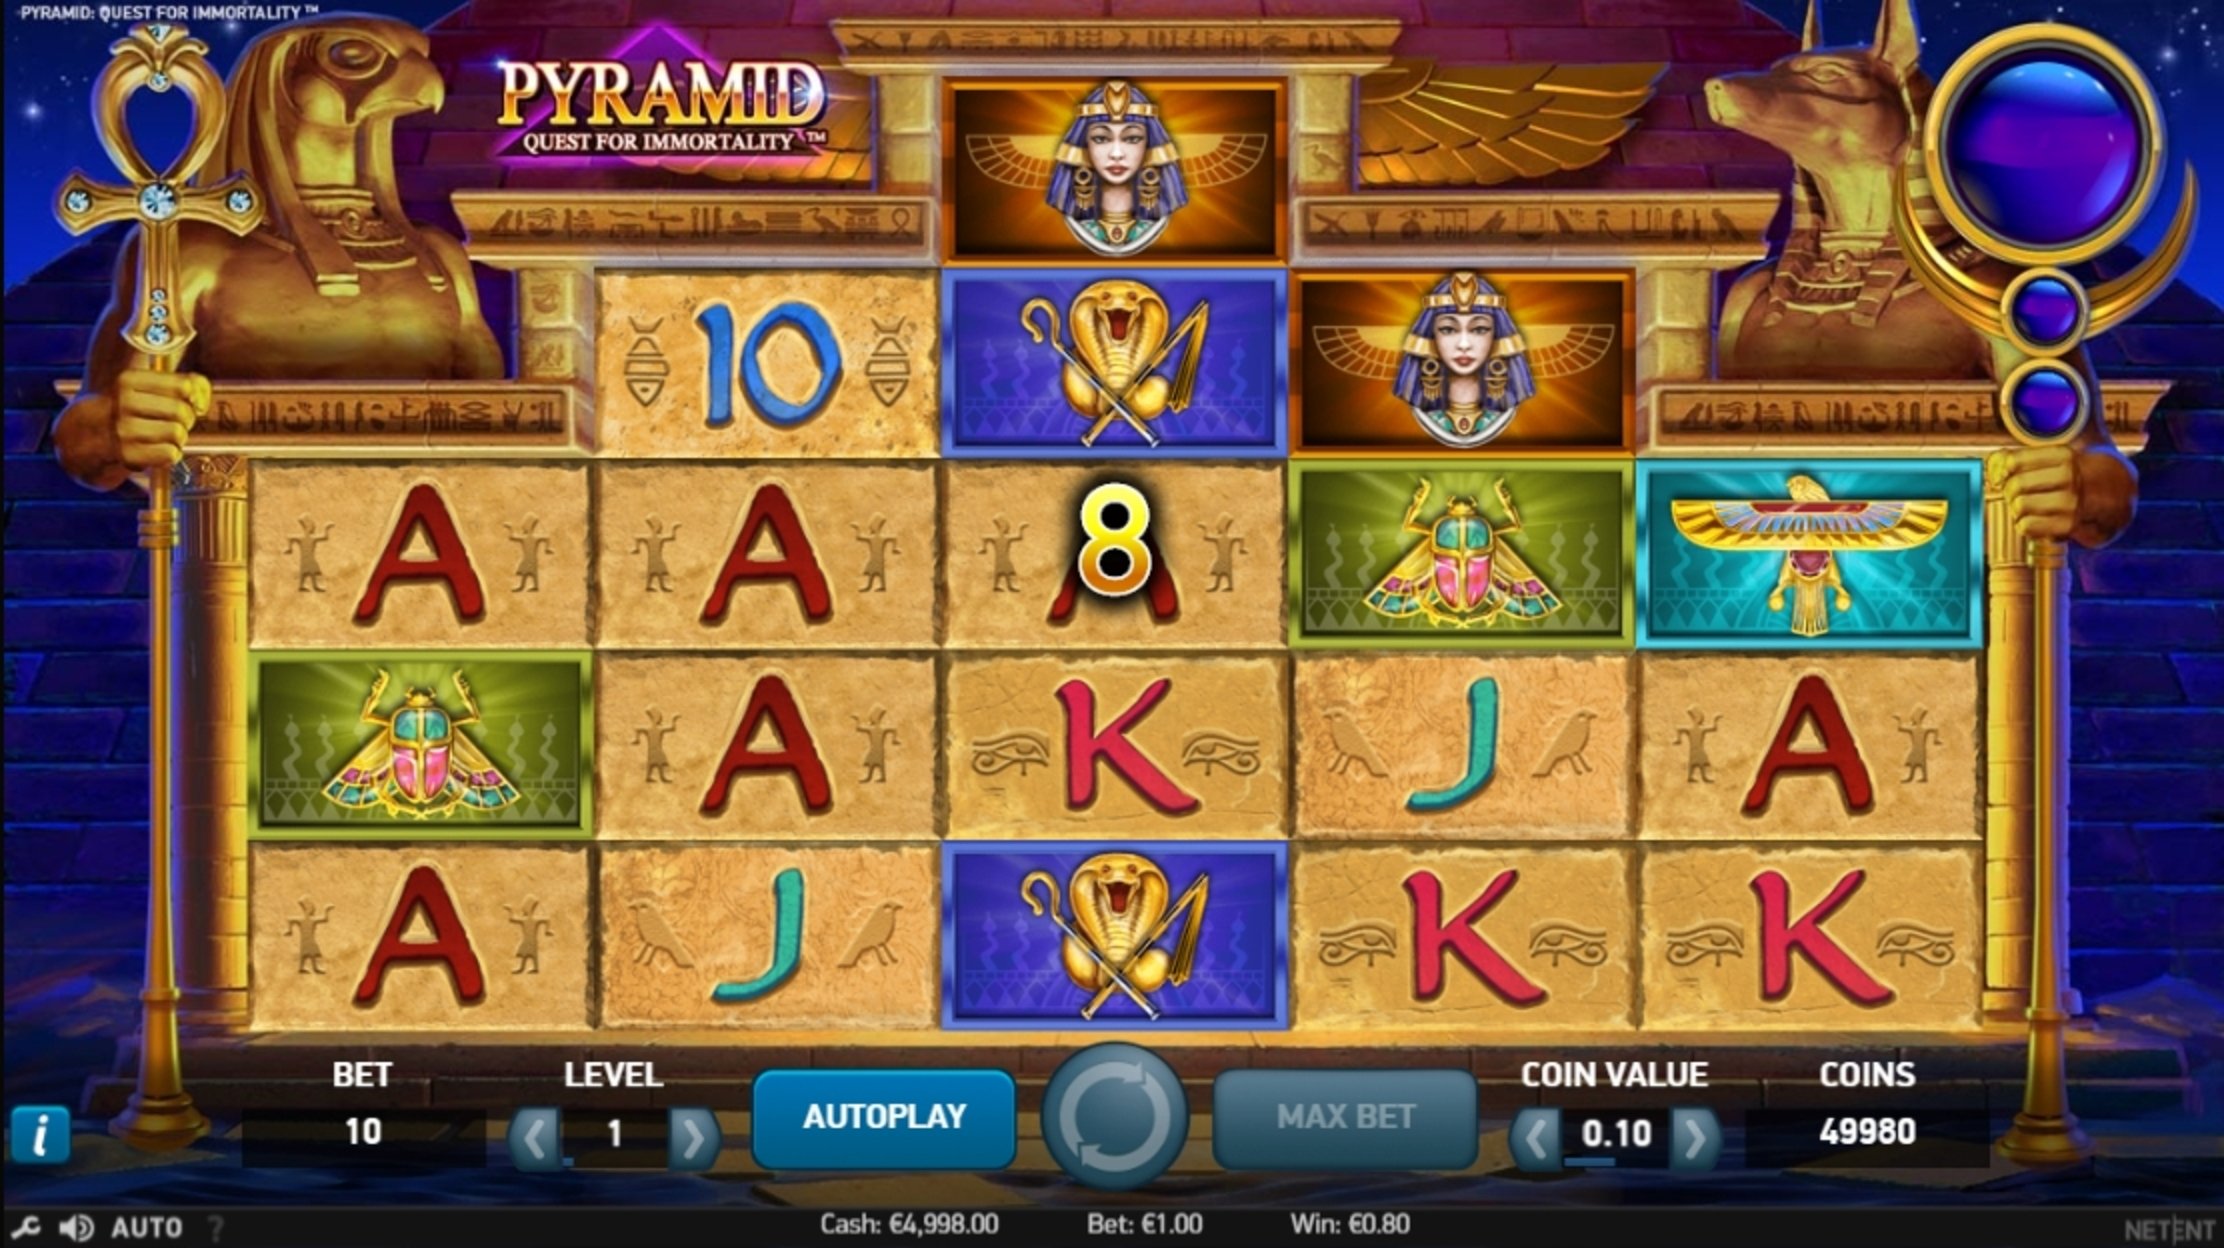 Win Money in Pyramid: Quest for Immortality Free Slot Game by NetEnt